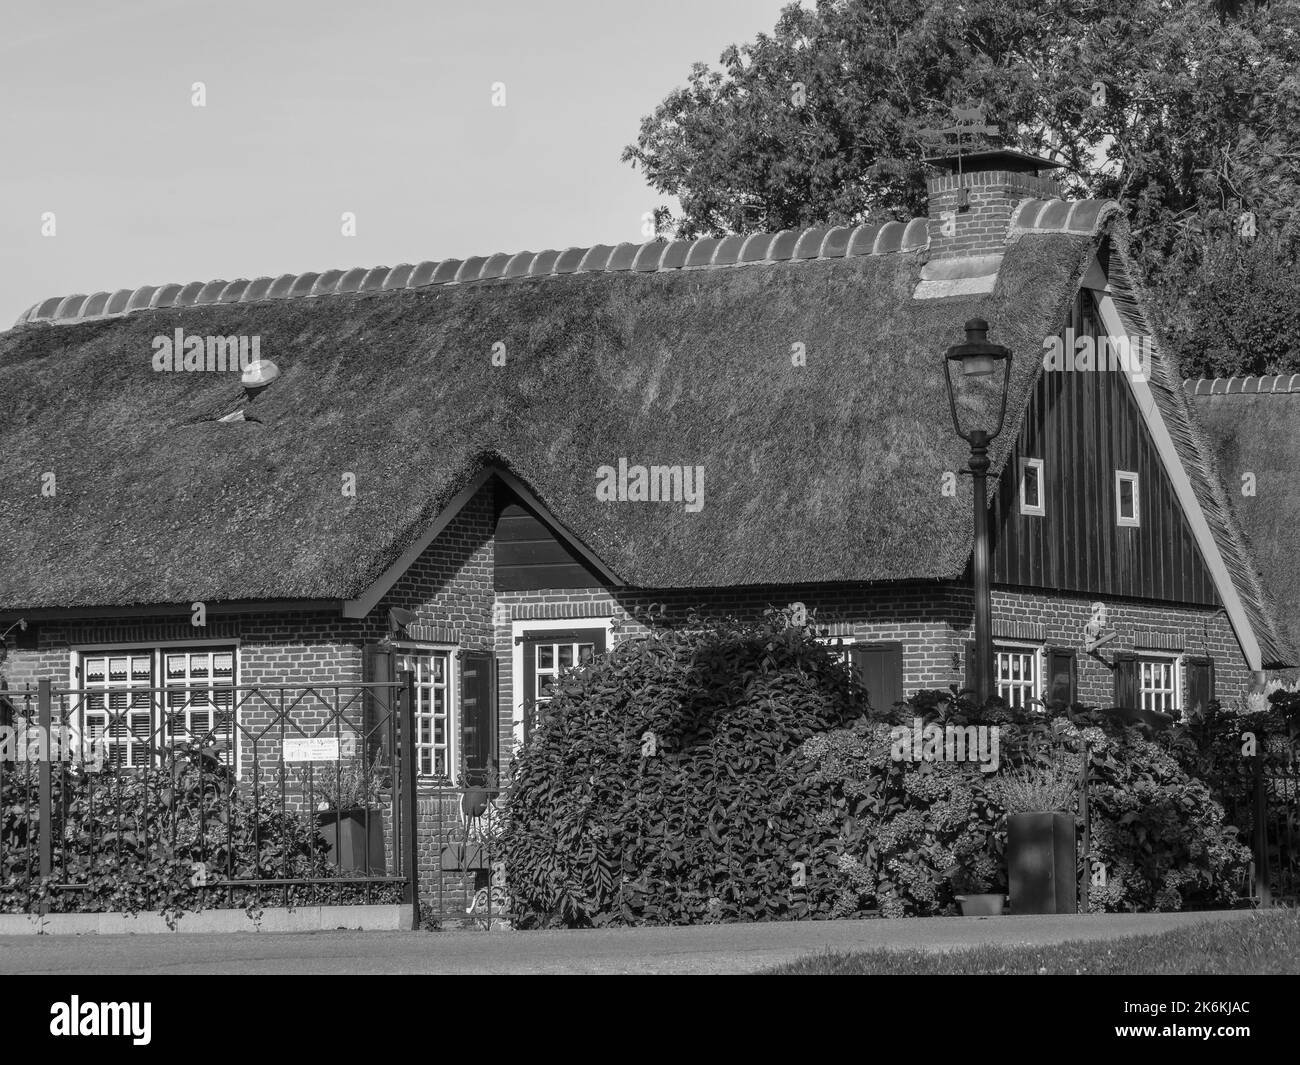 Giethoorn in the netherlands Stock Photo - Alamy